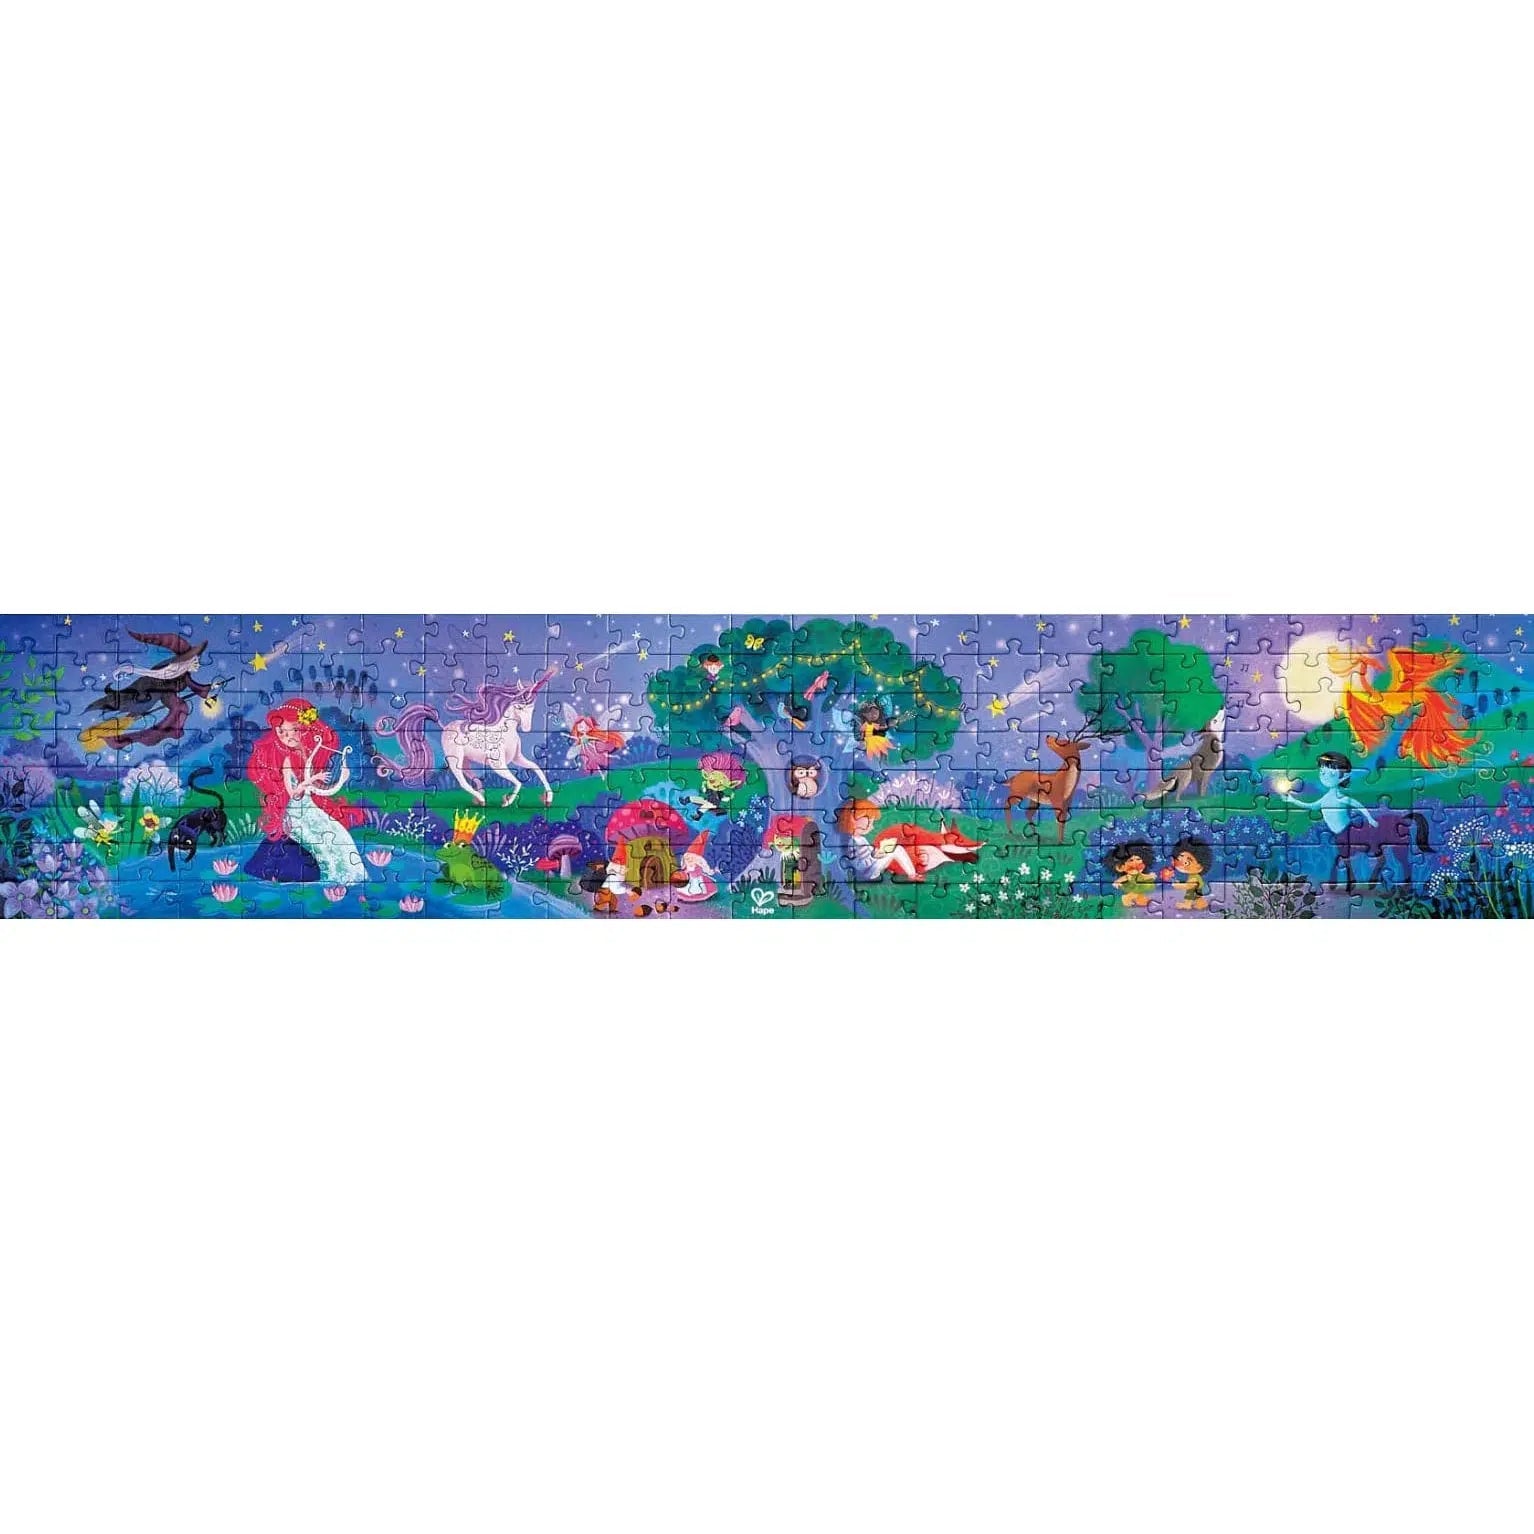 Hape-Magic Forest Puzzle - Glow in the Dark-E1633-Legacy Toys